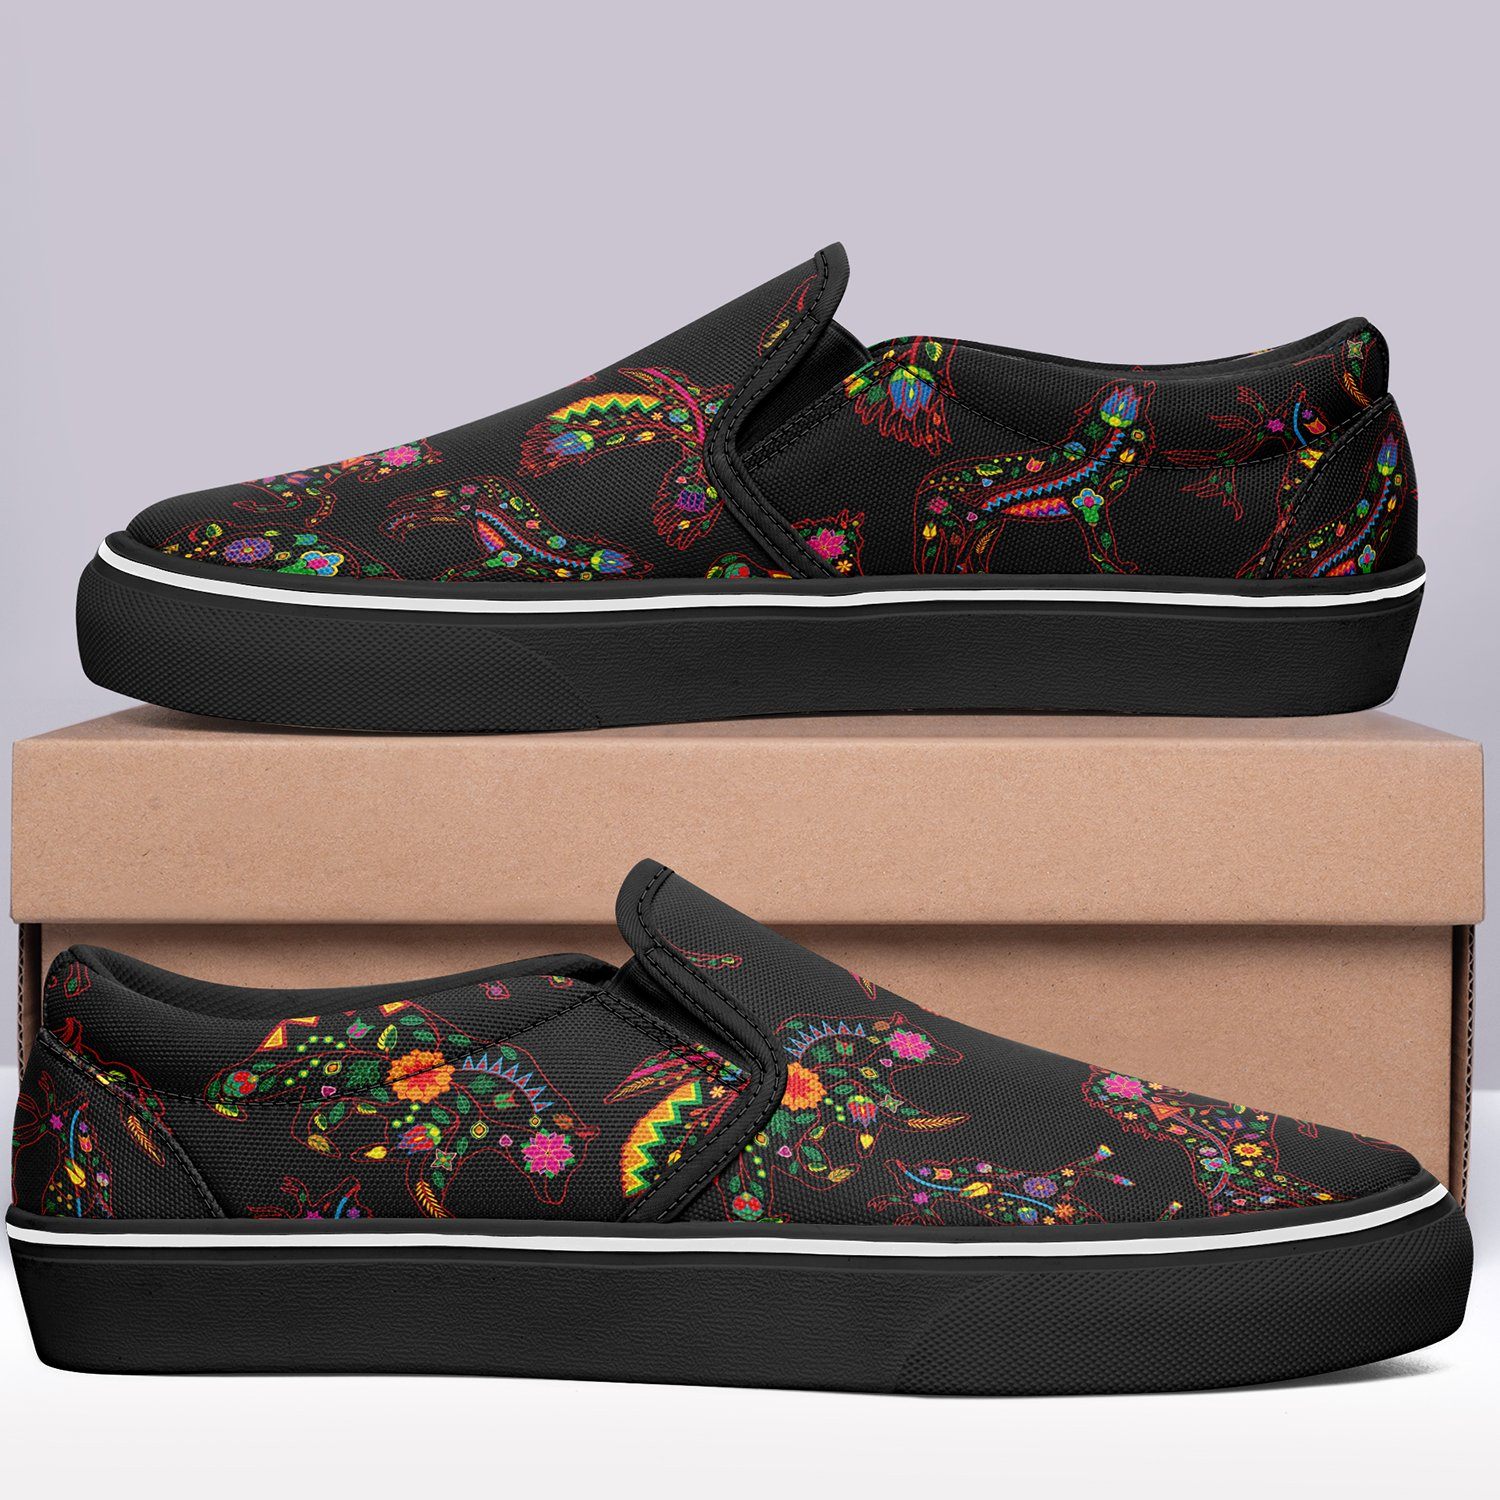 Floral Animals Otoyimm Kid's Canvas Slip On Shoes otoyimm Herman 